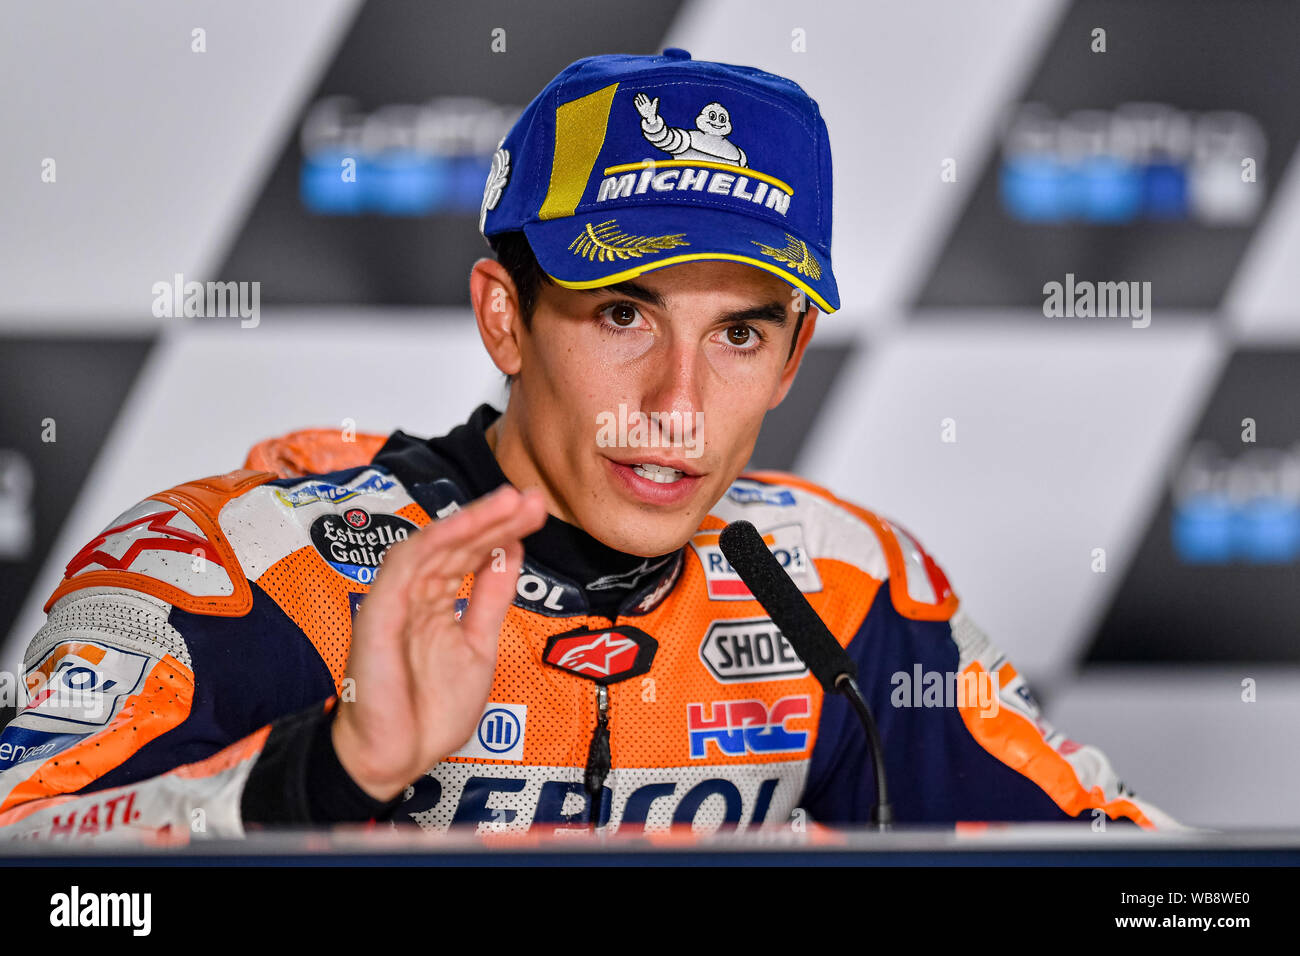 Towcester, UK. 25th Aug, 2019.  25th Aug, 2019. Marc Marquez (SPA) of Repsol Honda Team at Press Conference after Sunday’s Race of  GoPro British Grand Prix at Silverstone Circuit on Sunday, August 25, 2019 in TOWCESTER, ENGLAND. Credit: Taka G Wu/Alamy Live News Stock Photo